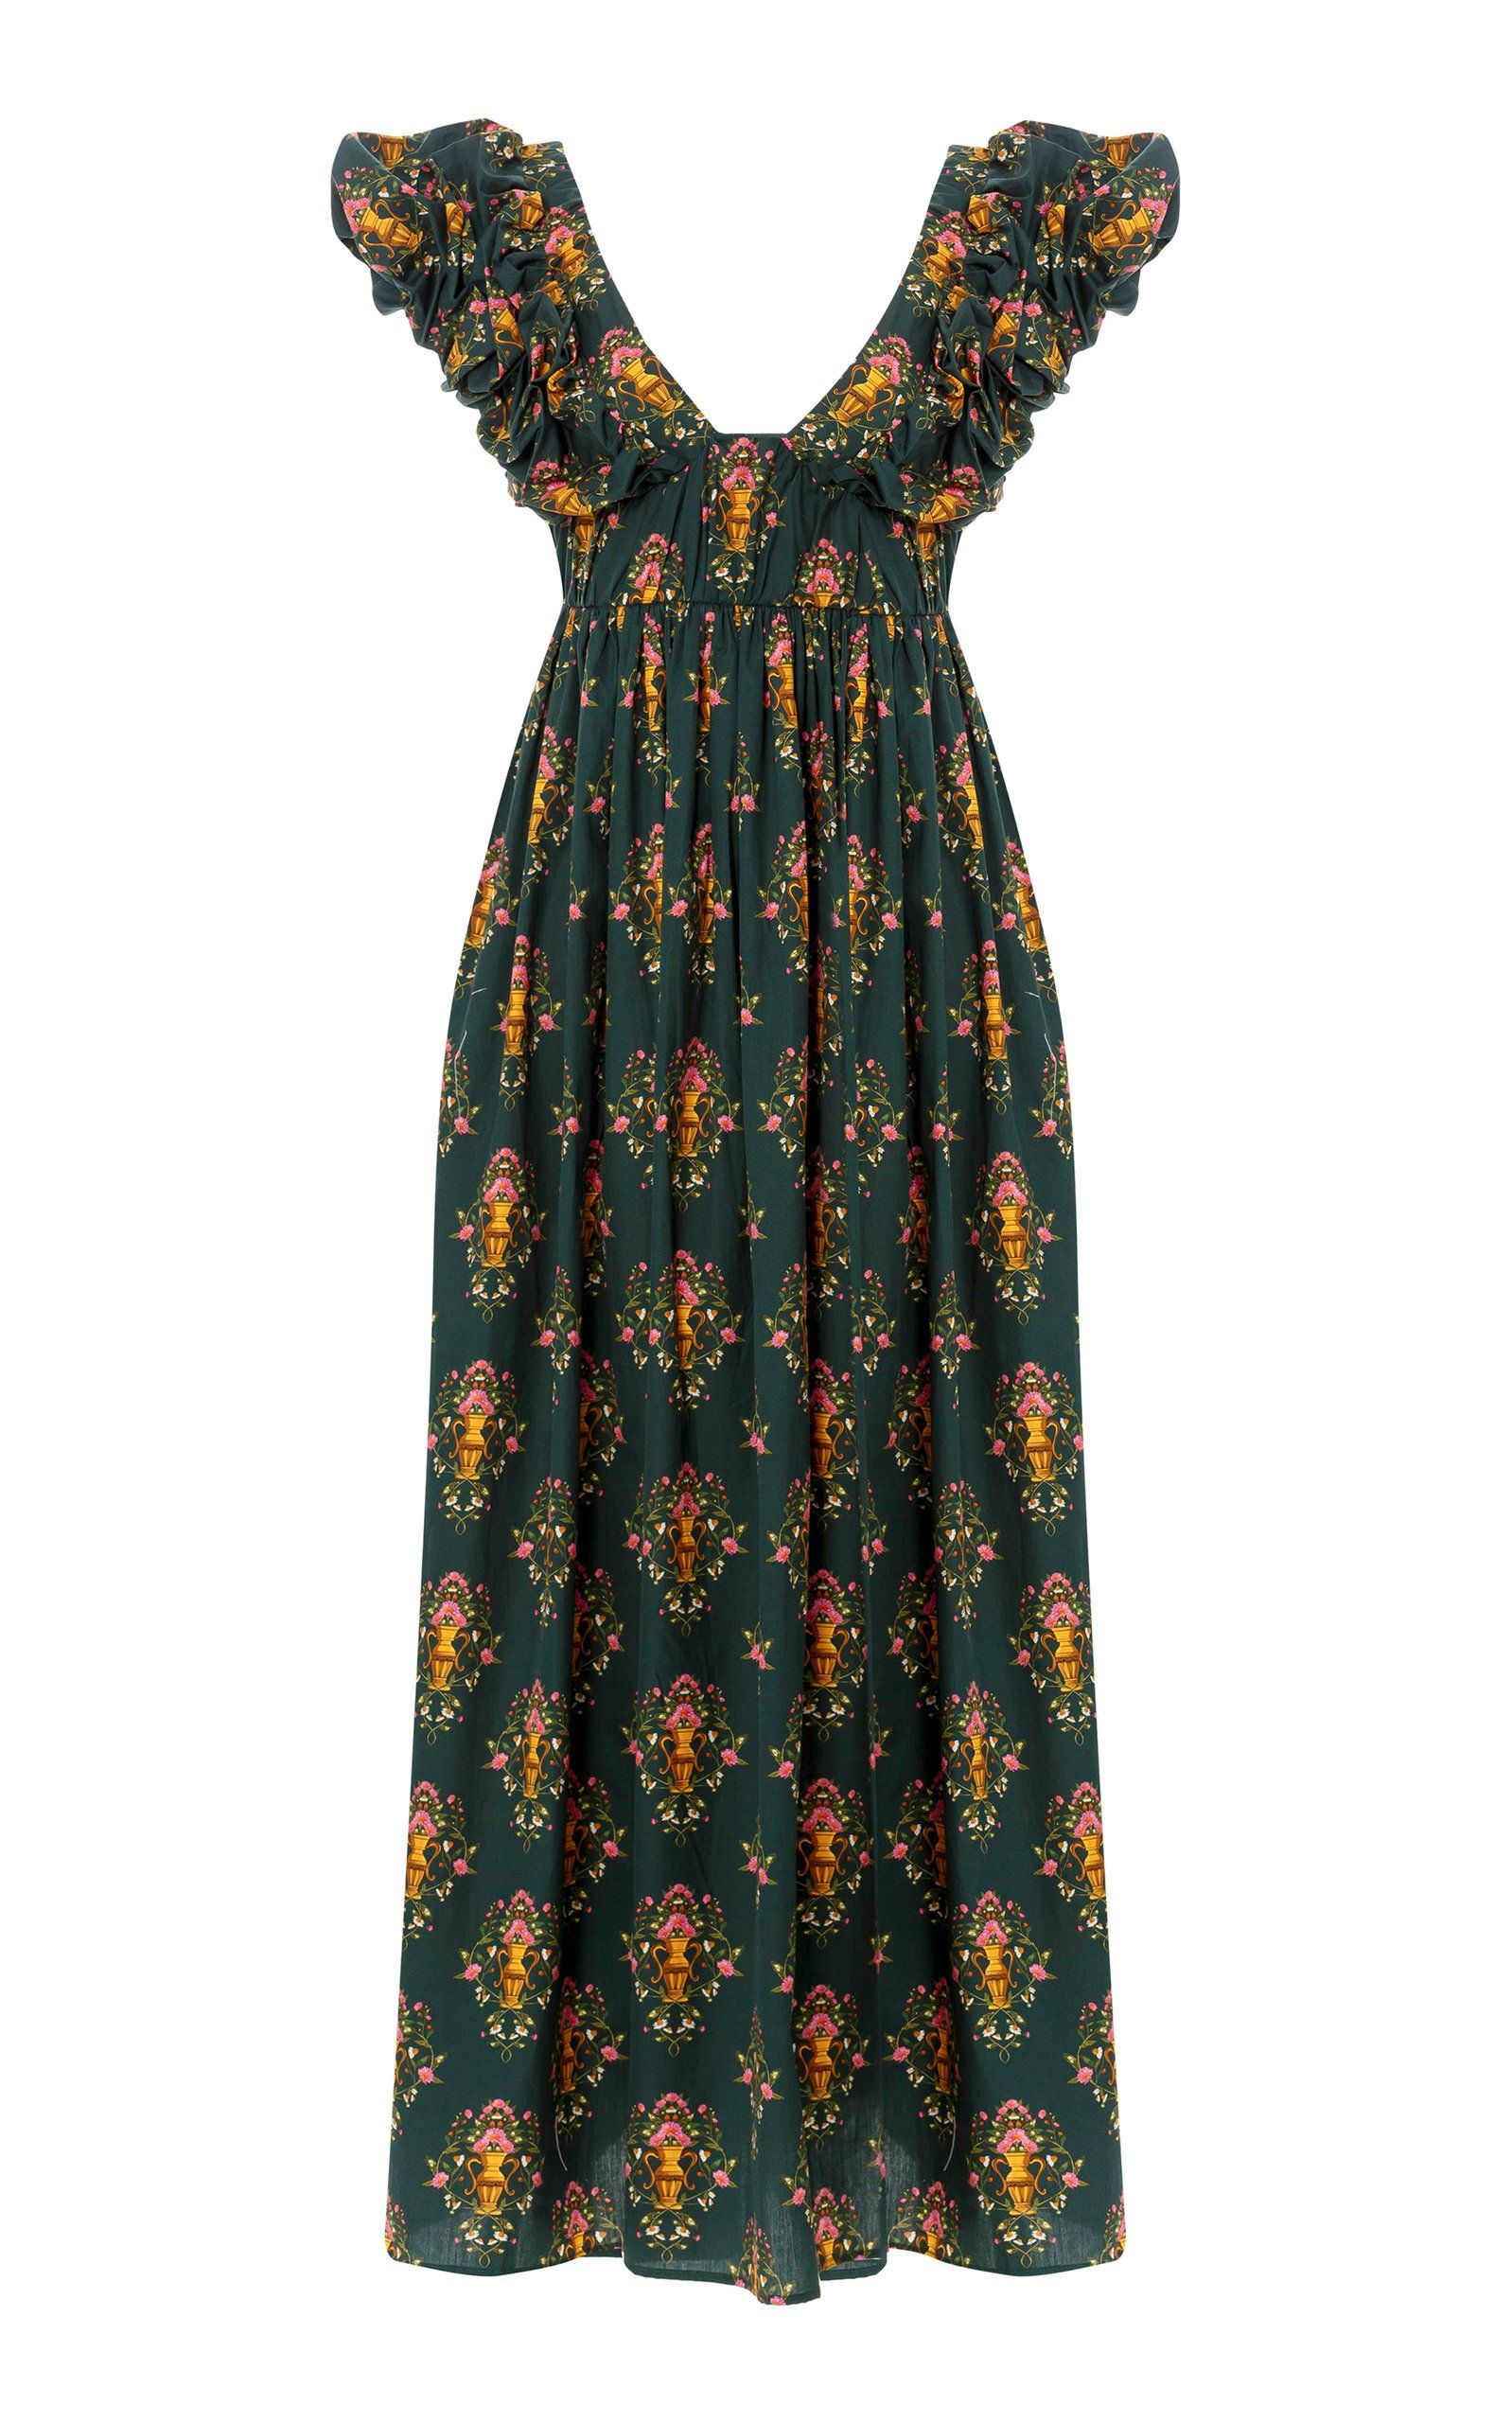 Best Flowy Dresses for Women: 19 Flowy Dresses for Easy Outfits